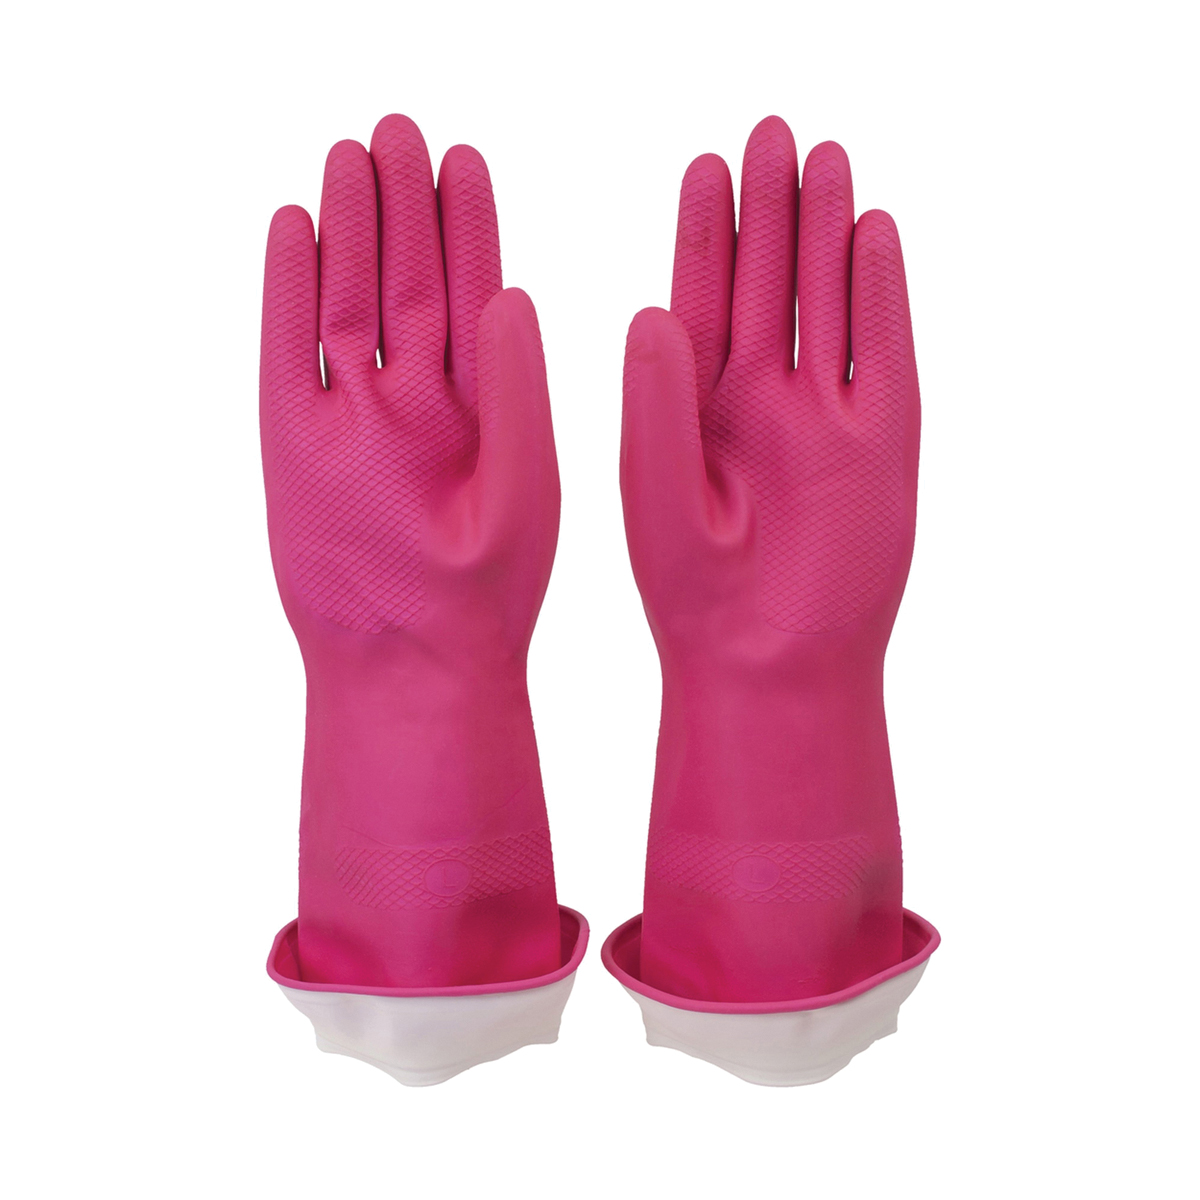 Casabella WaterBlock 46060 Cleaning Gloves, L, Latex, Pink - 2